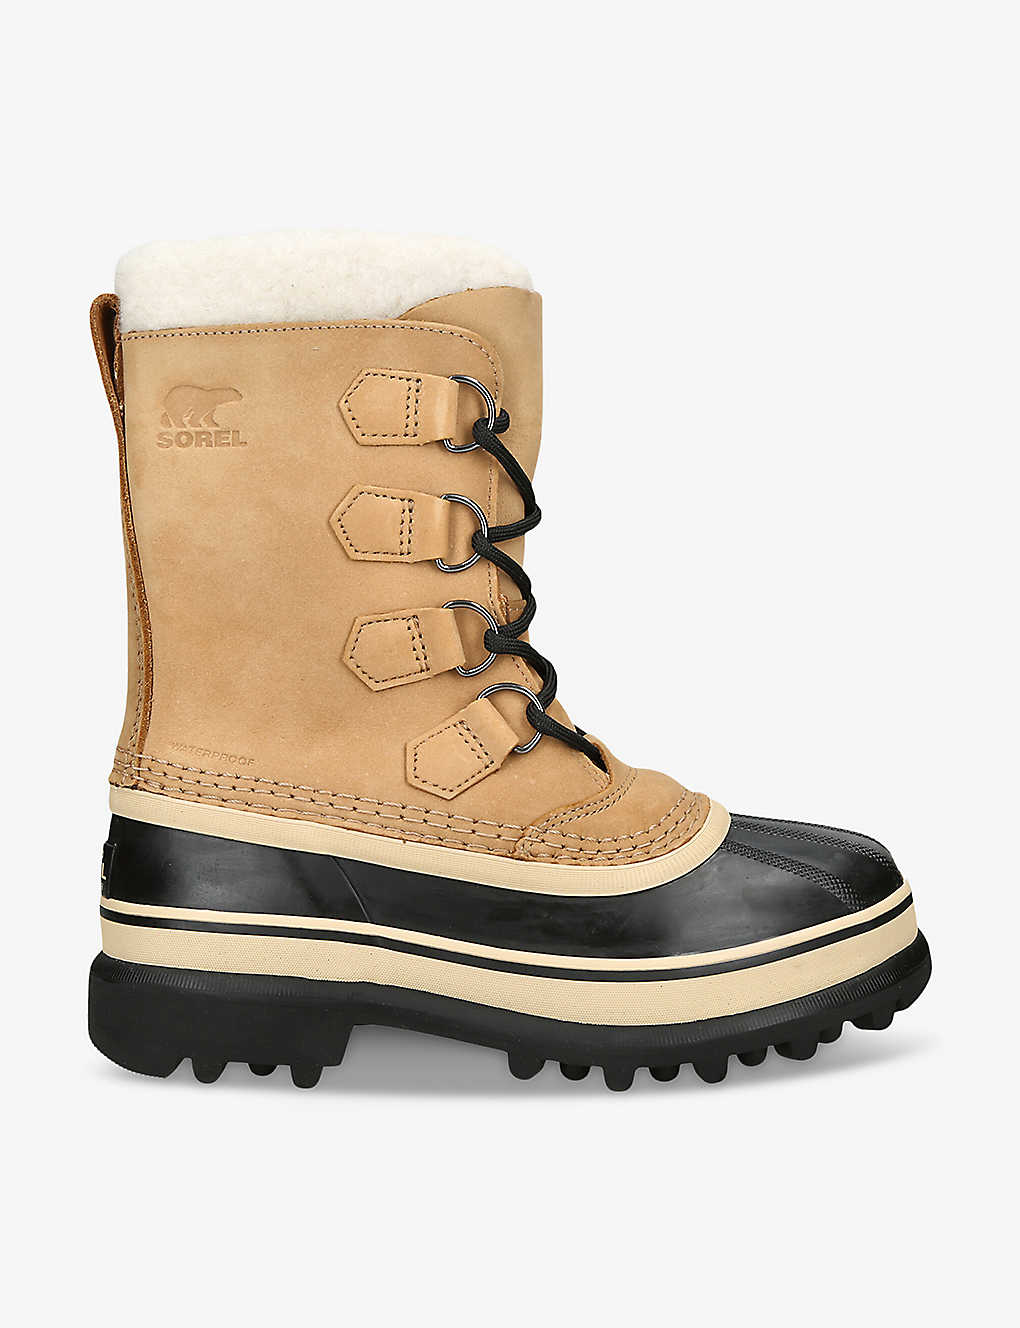 Sorel Caribou Waterproof Boots With Removable Inner Boot In Buff Nubuck Leather-brown